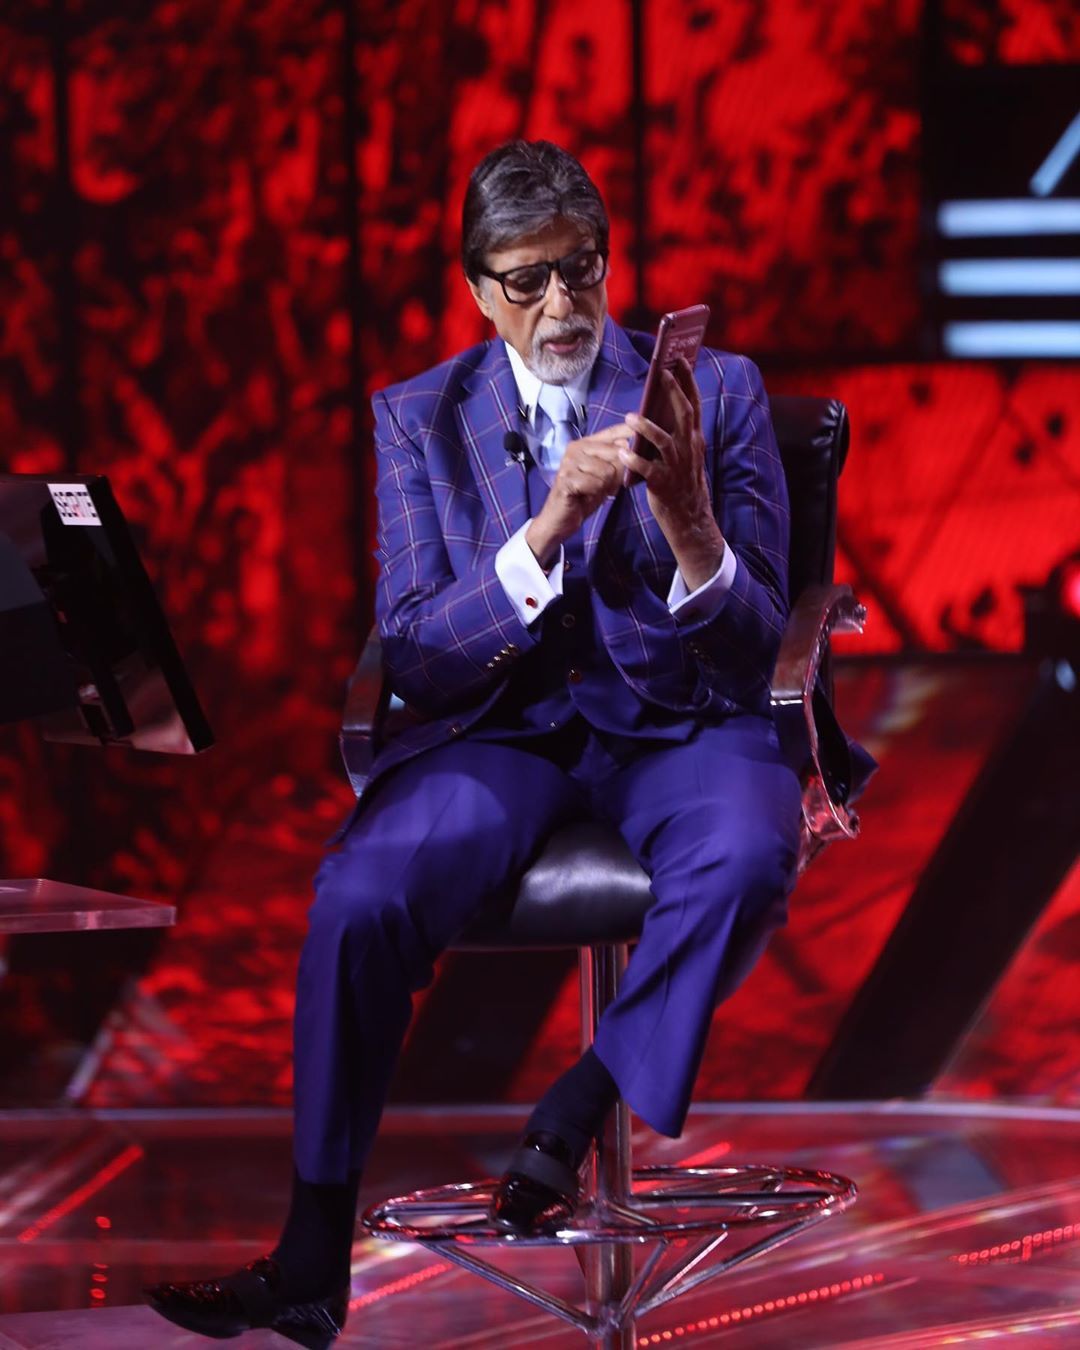 Kaun Banega Crorepati 12 Gets A Premiere Date, This Is When You Can Expect Amitabh Bachchan Back On The Small Screen